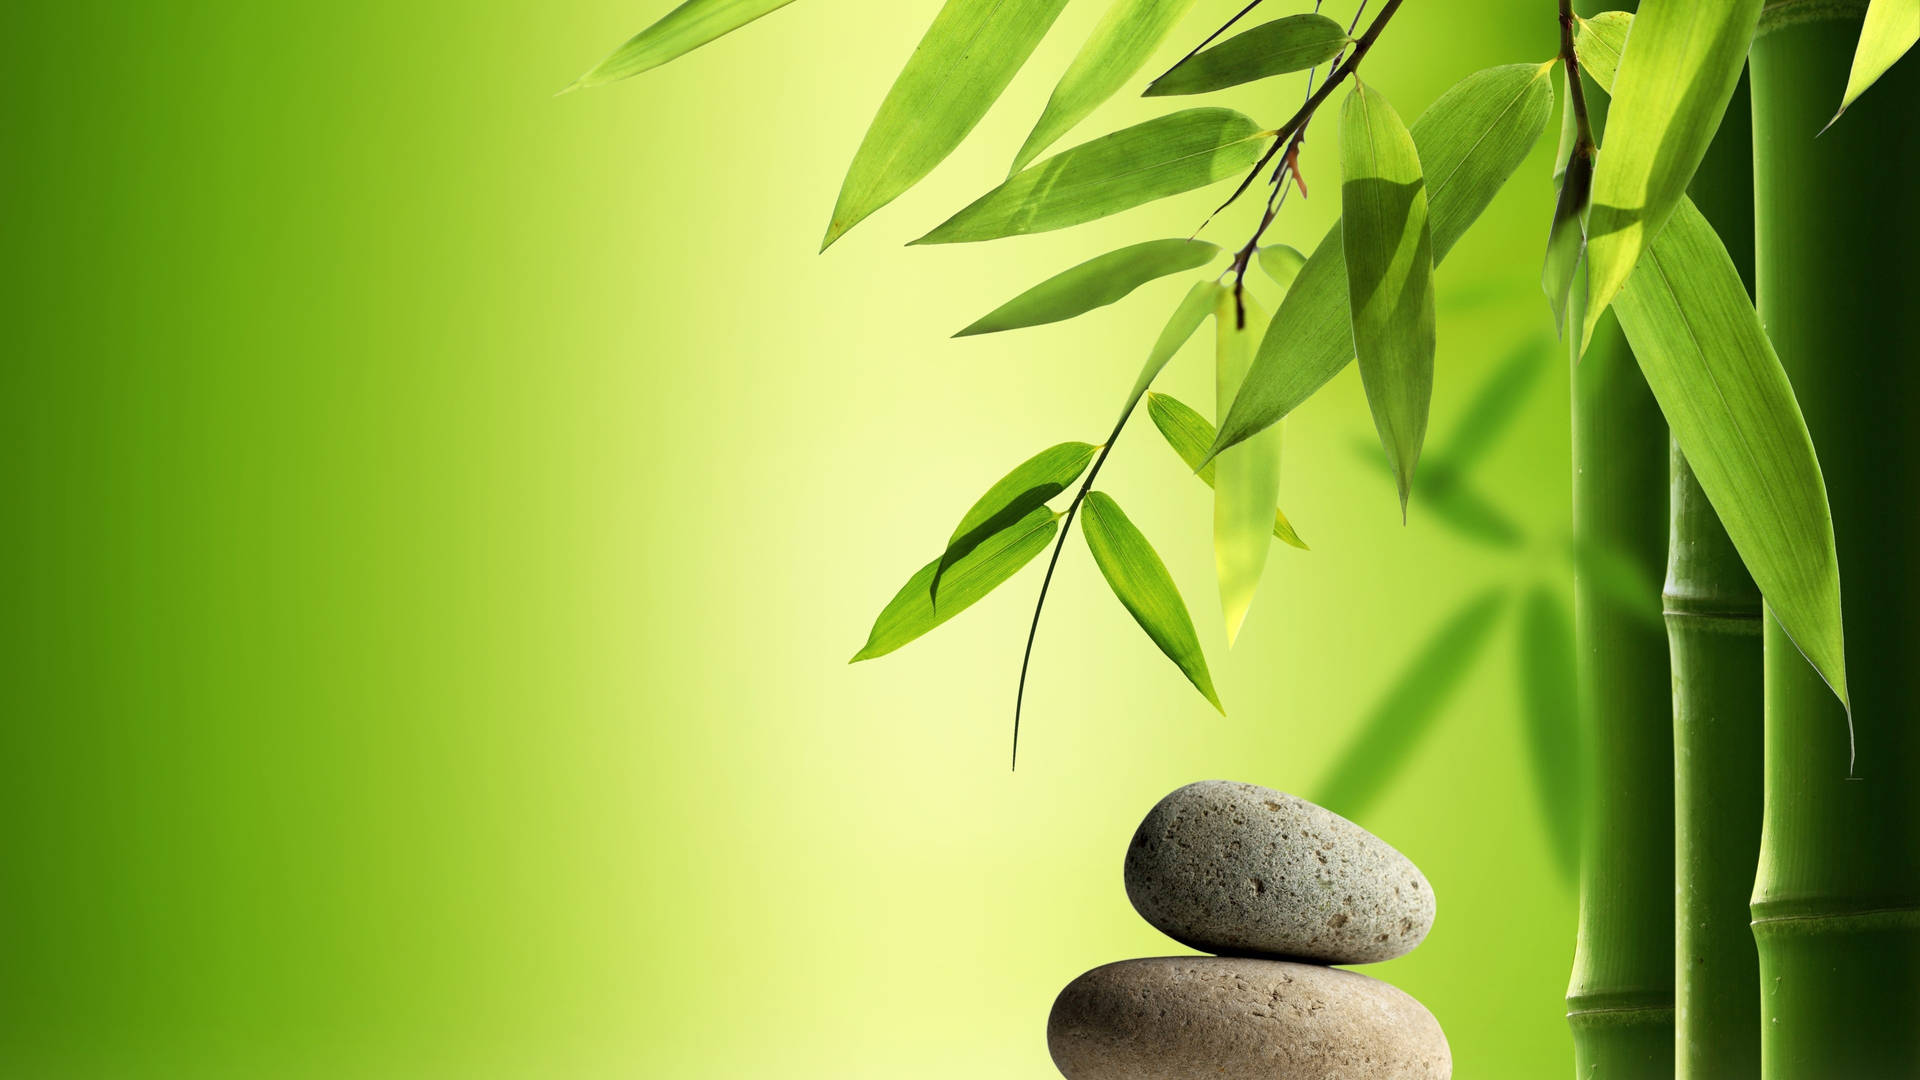 Bamboo 4k Plant Leaves And Stones Wallpaper